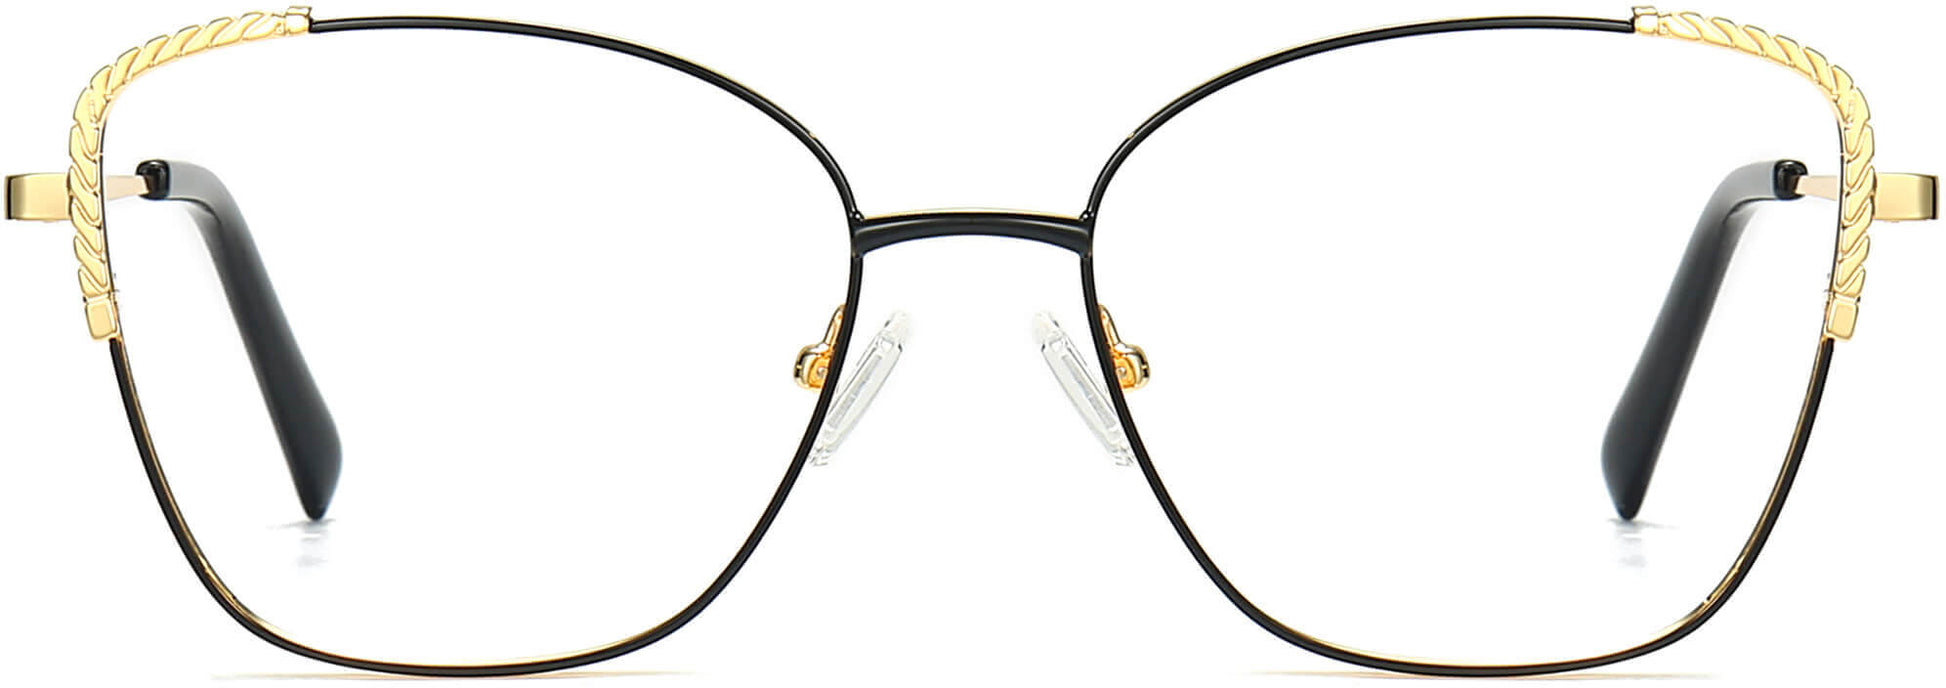 Charley Cateye Black Eyeglasses from ANRRI, front view